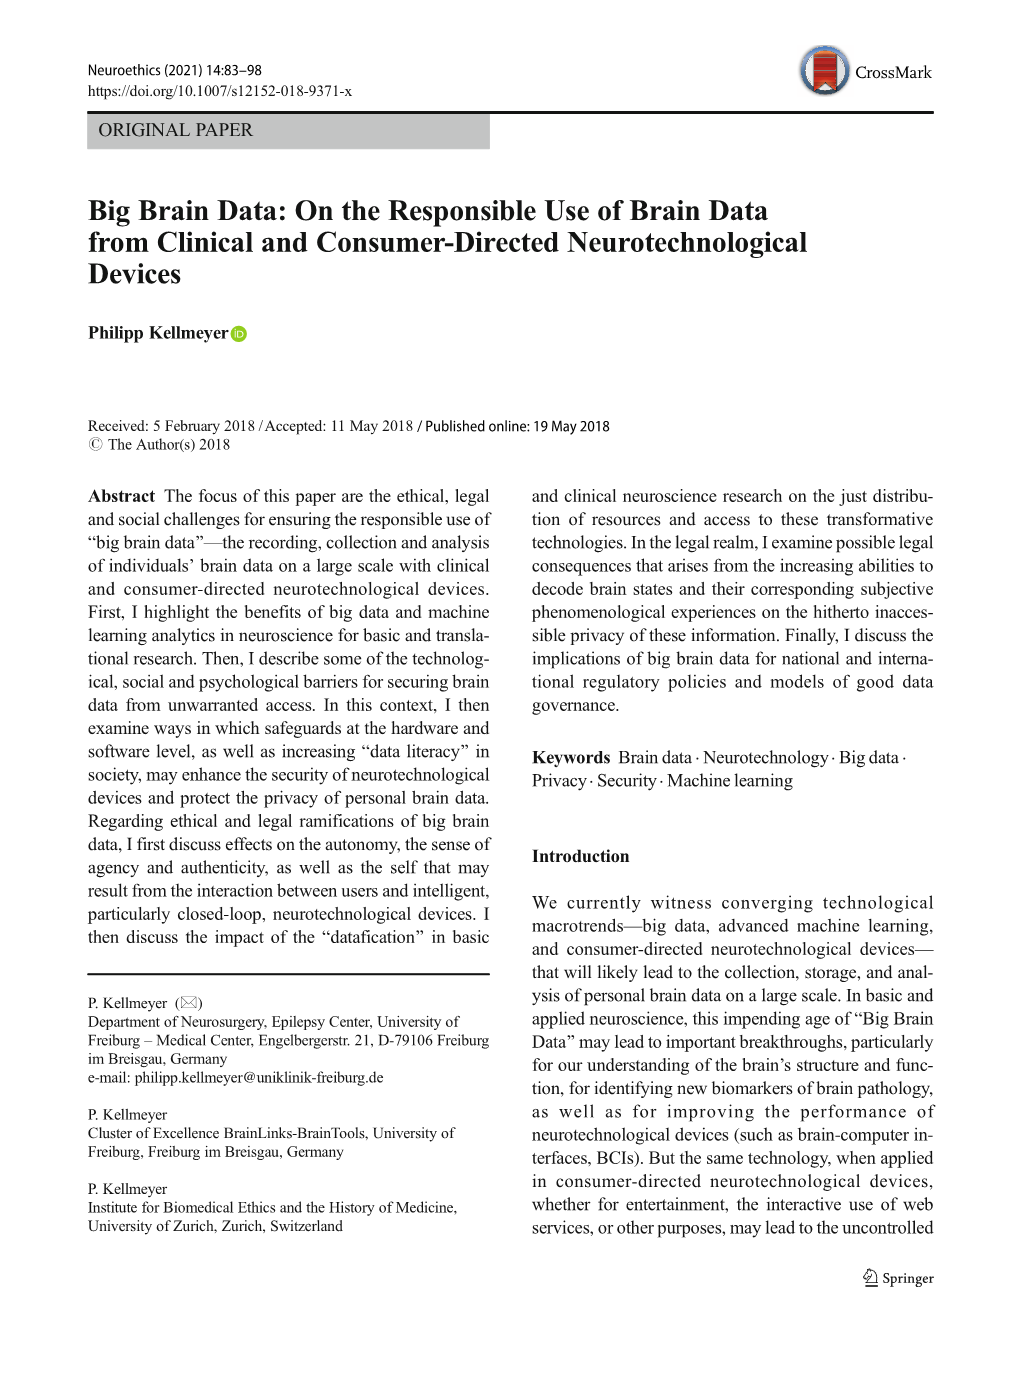 On the Responsible Use of Brain Data from Clinical and Consumer-Directed Neurotechnological Devices